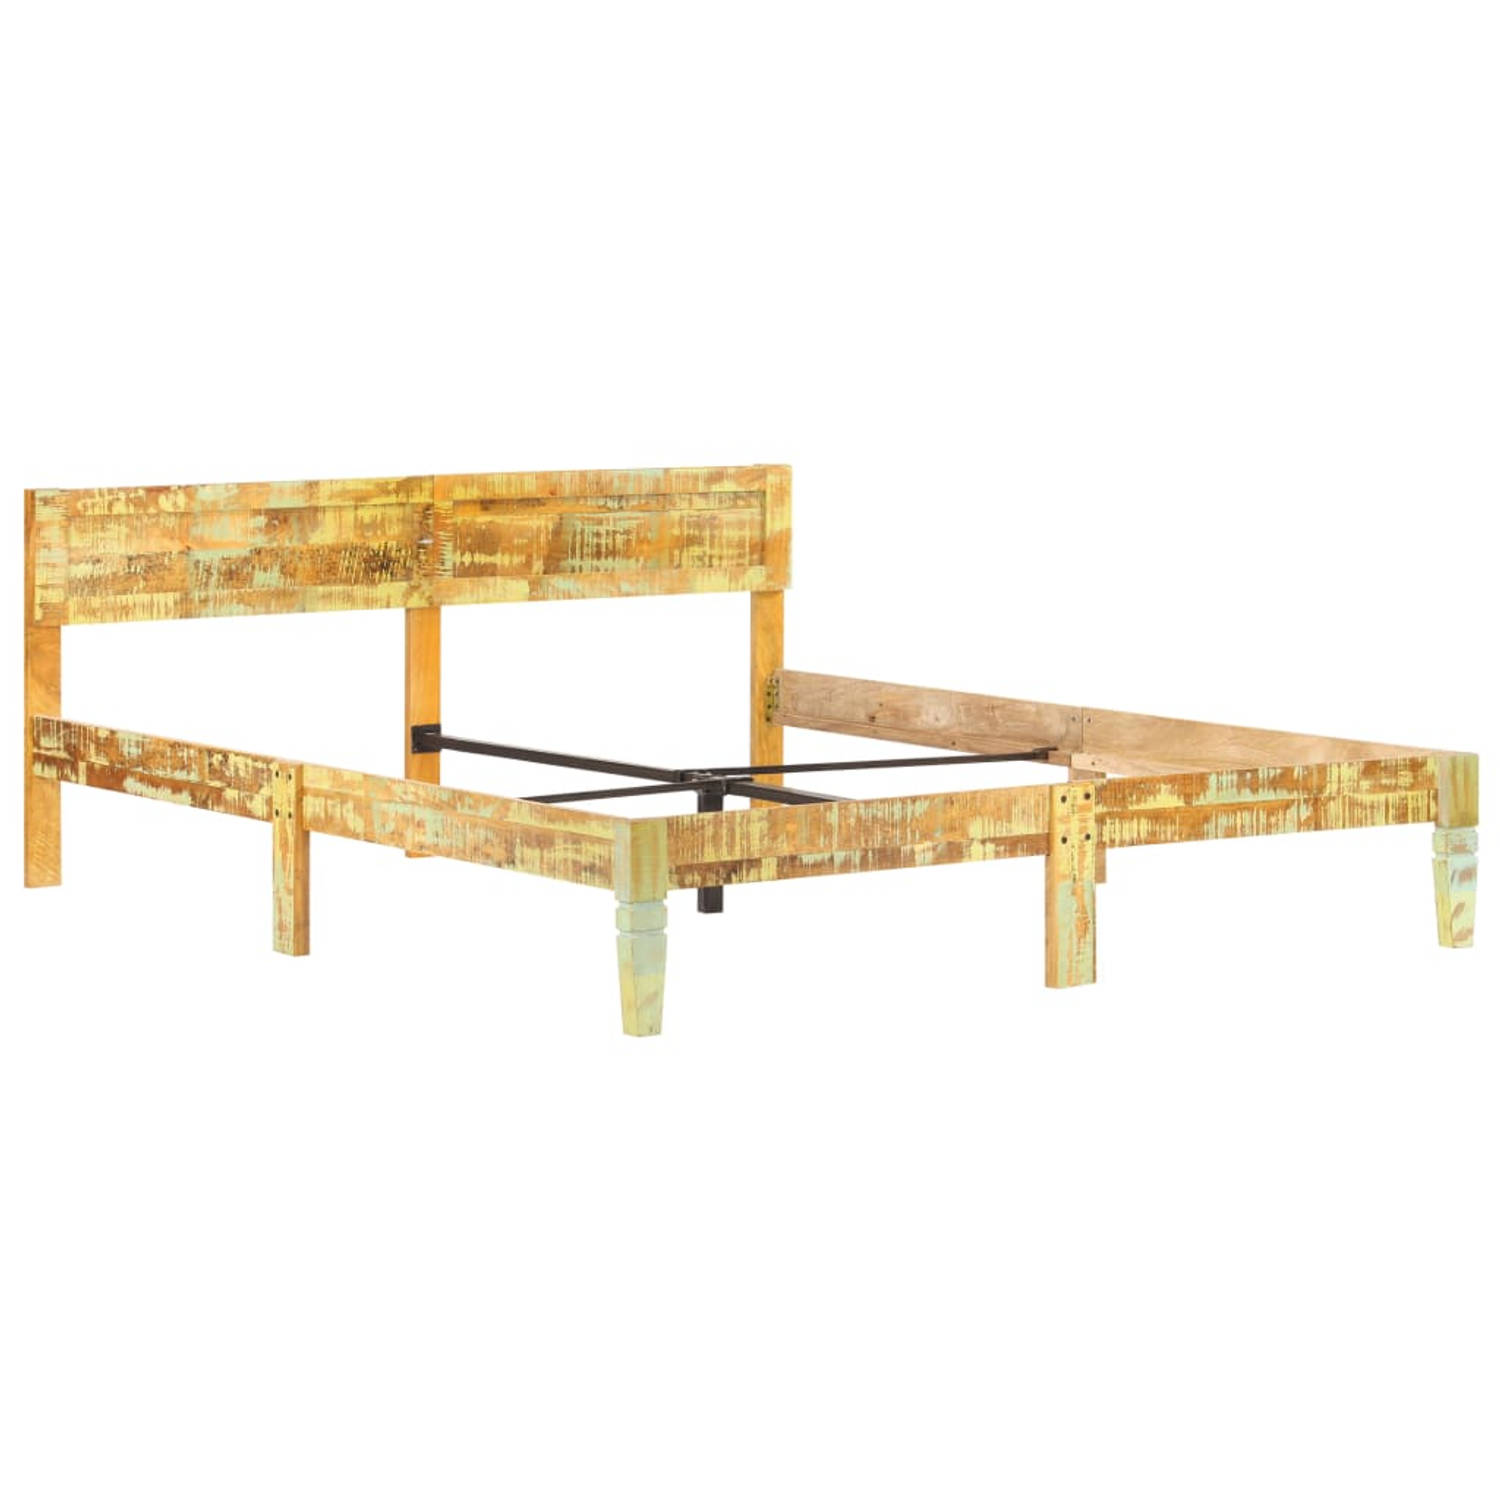 The Living Store Bedframe massief gerecycled hout 180x200 cm - Bedframe - Bedframe - Bed Frame - Bed Frames - Bed - Bedden - 2-persoonsbed - 2-persoonsbedden - Tweepersoons Bed